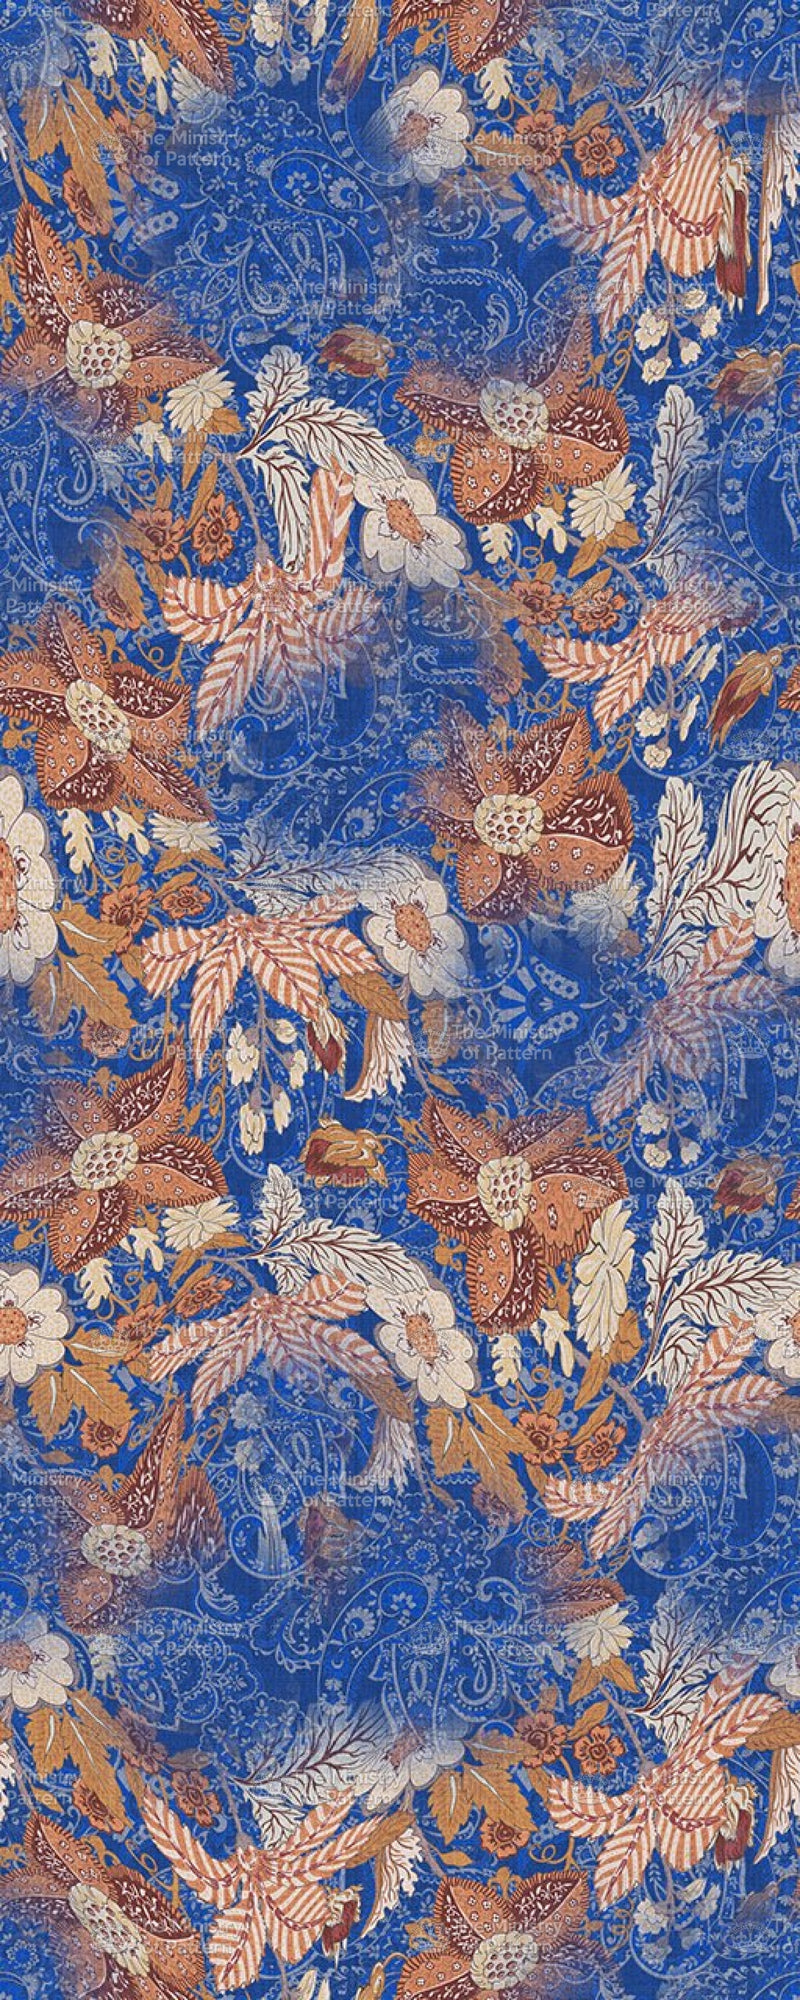 Textured Japanese Paisley Floral